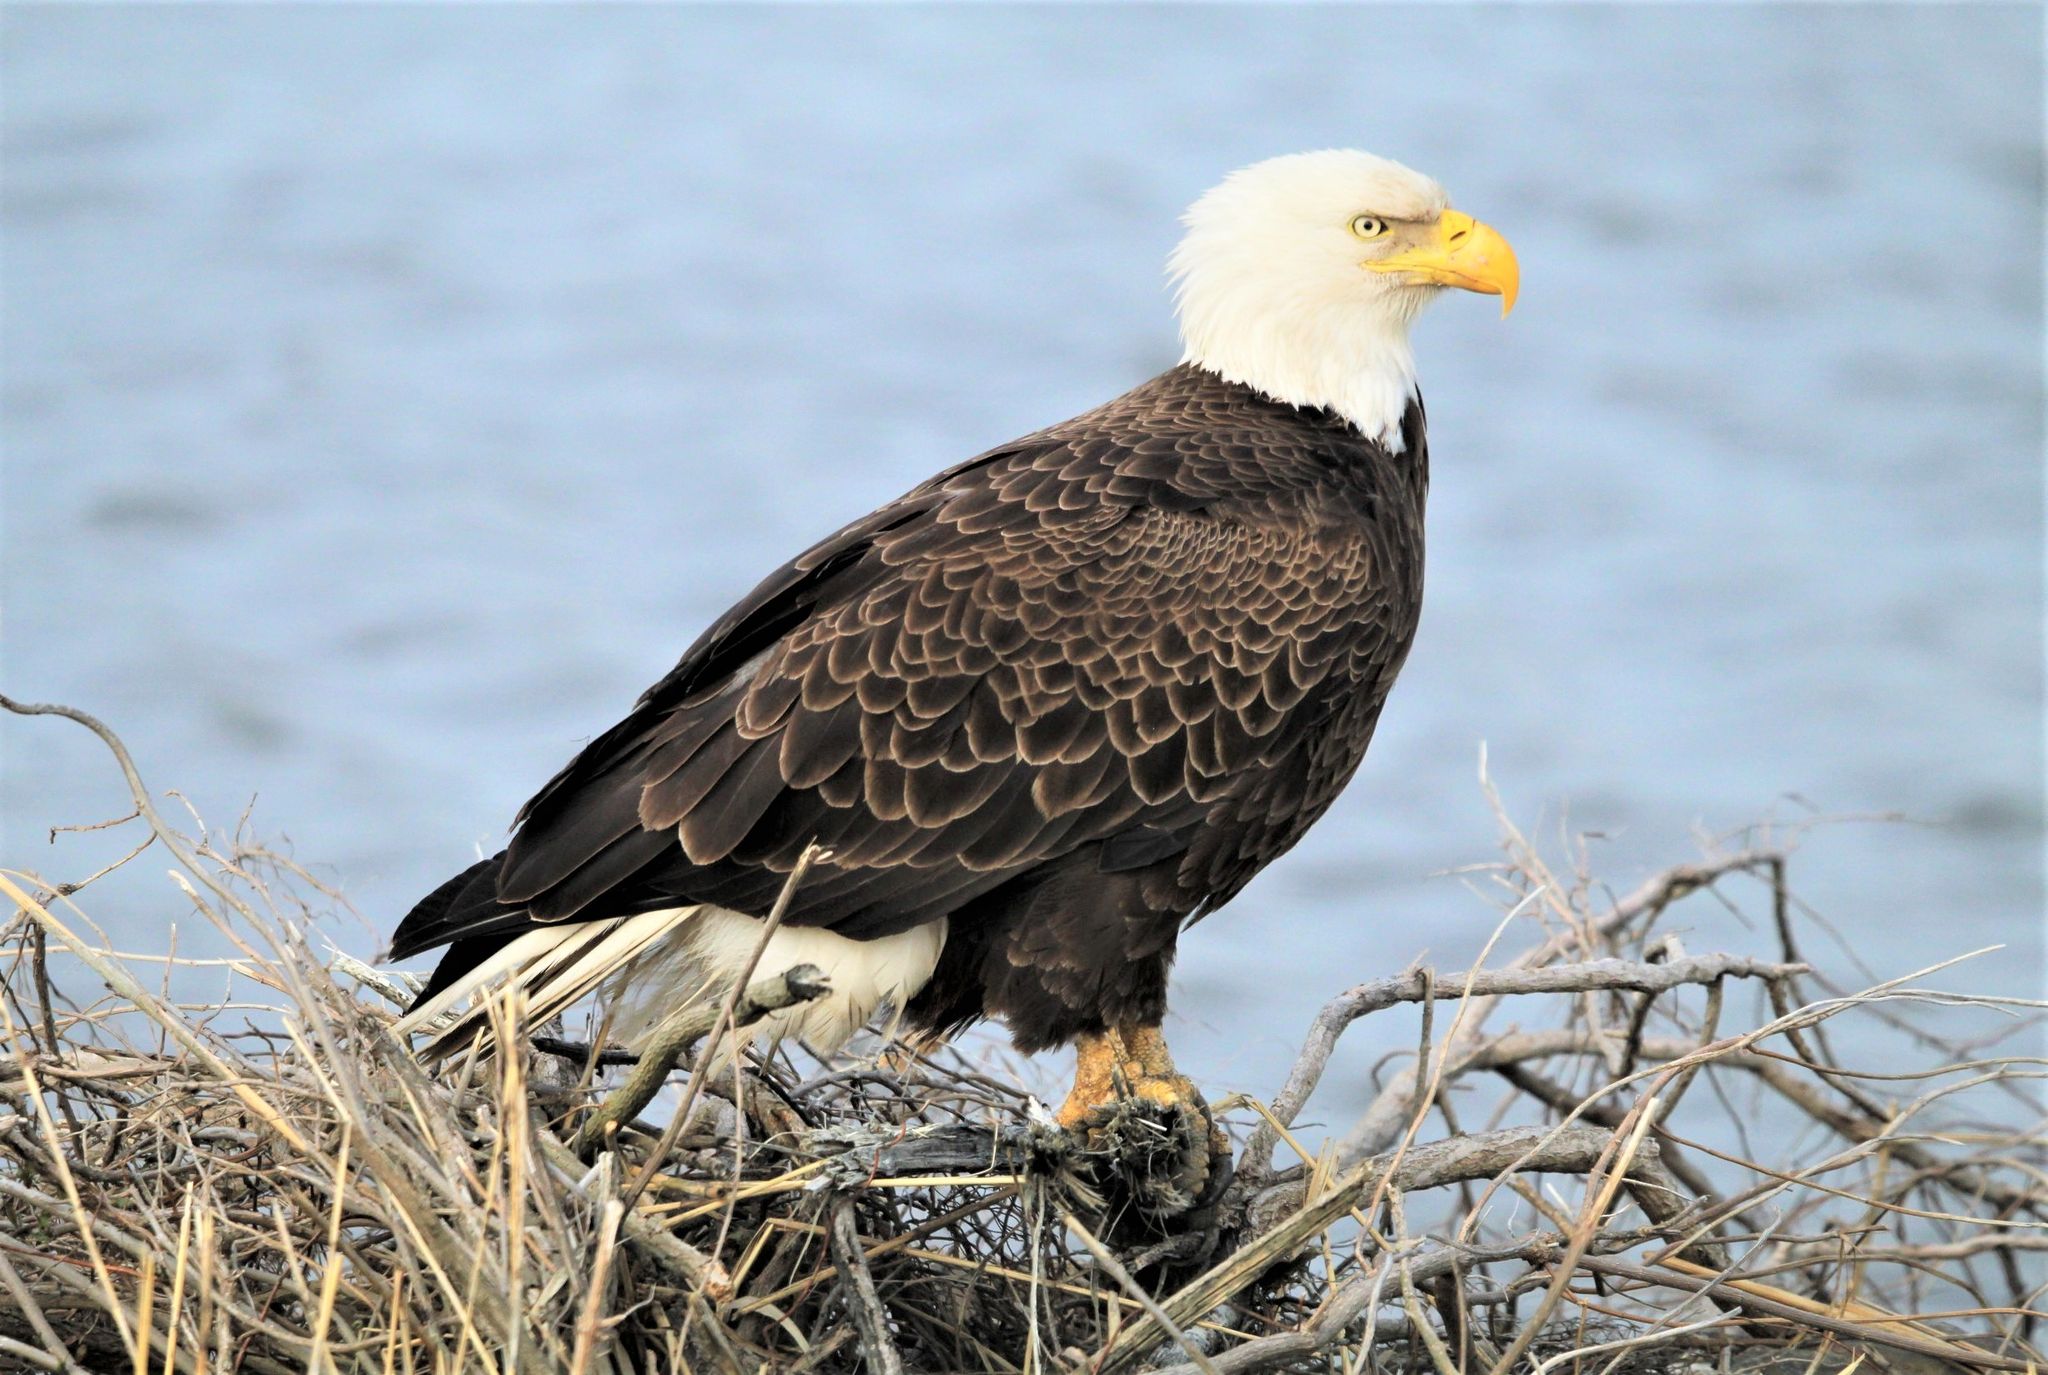 A bald eagle sits on sticks and branches with water behind it.